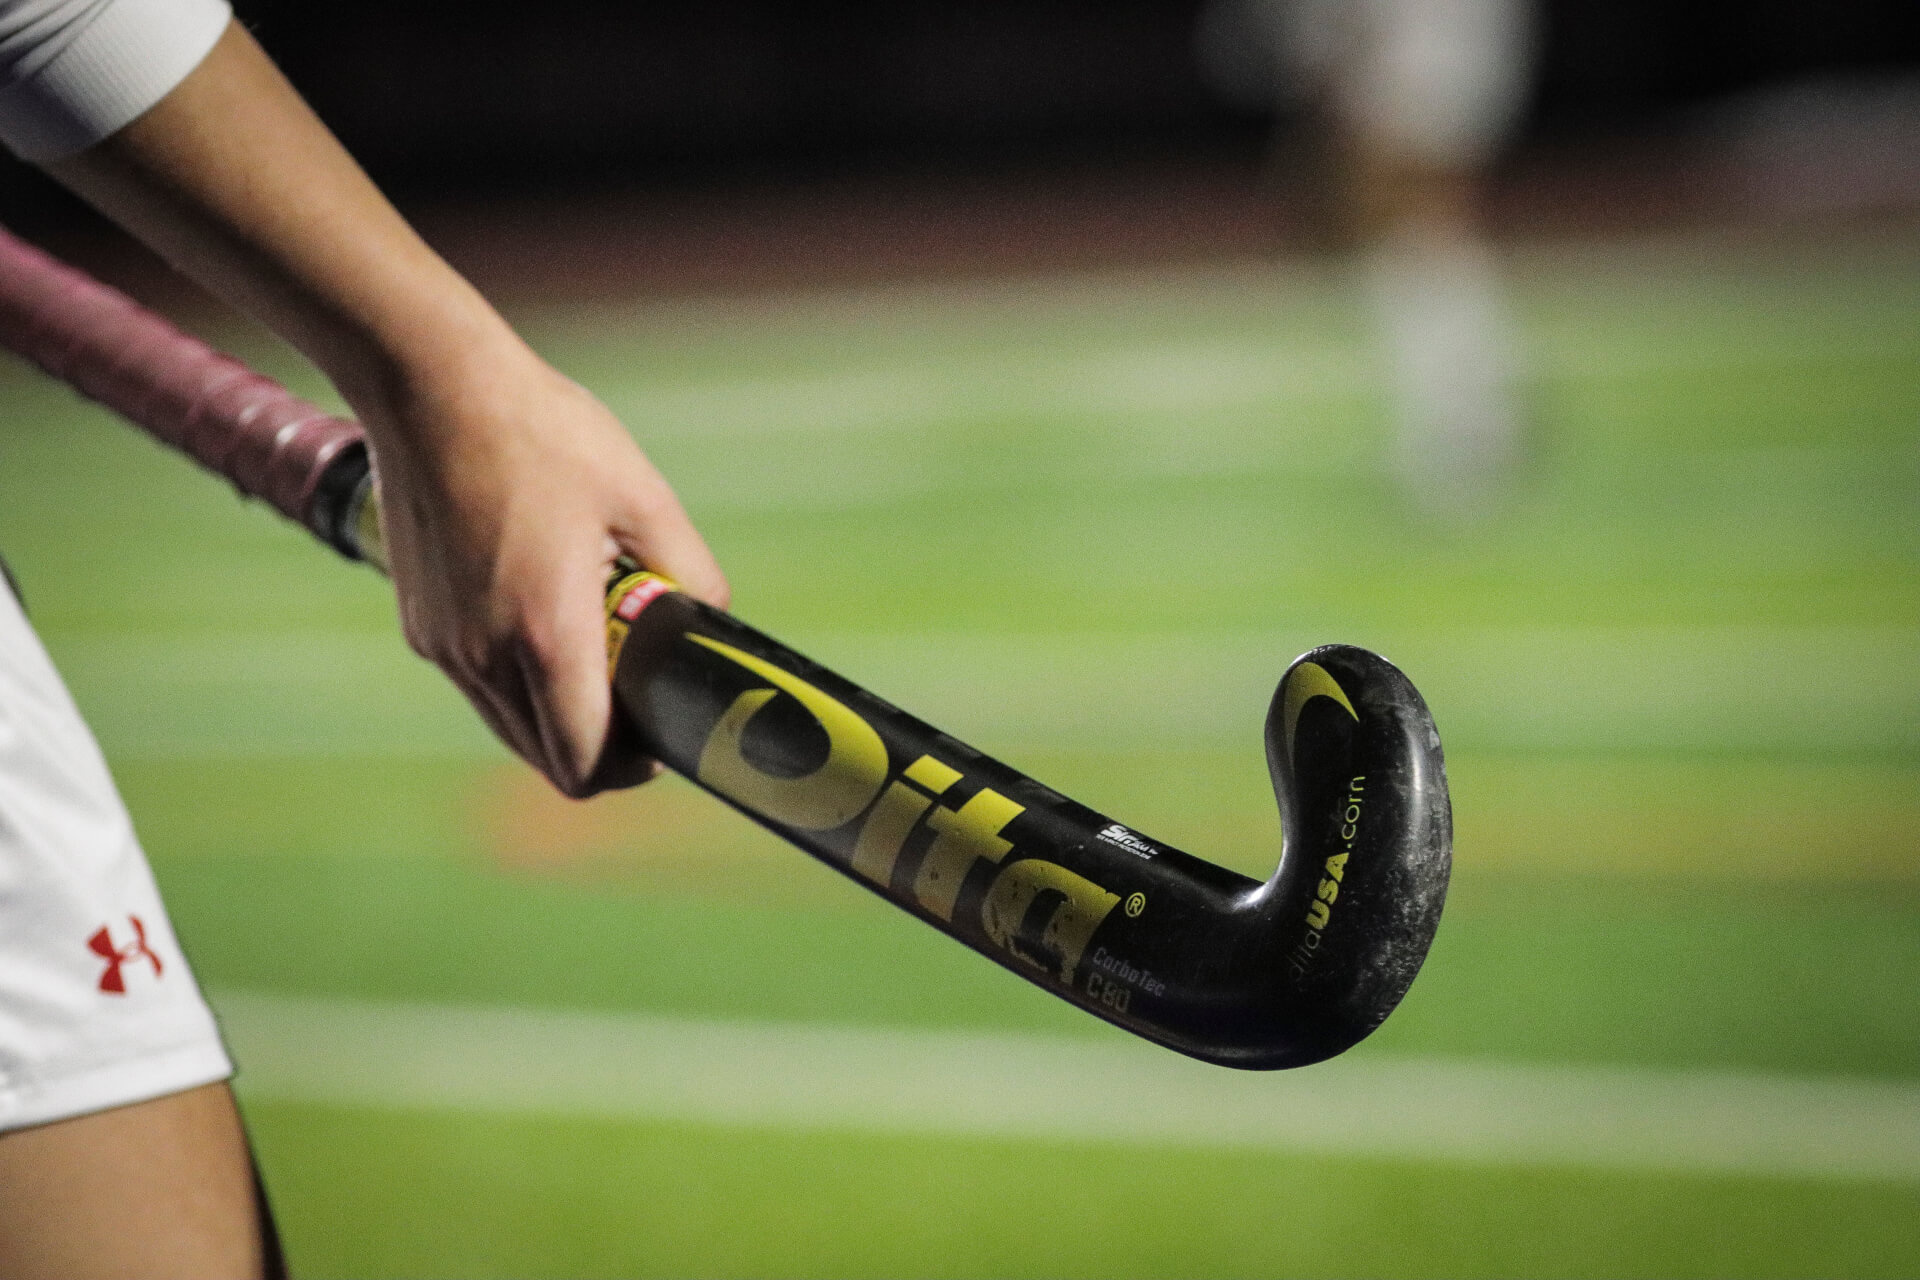 Field Hockey: A stick in the hands of a professional player, Competitive ball sport. 1920x1280 HD Wallpaper.